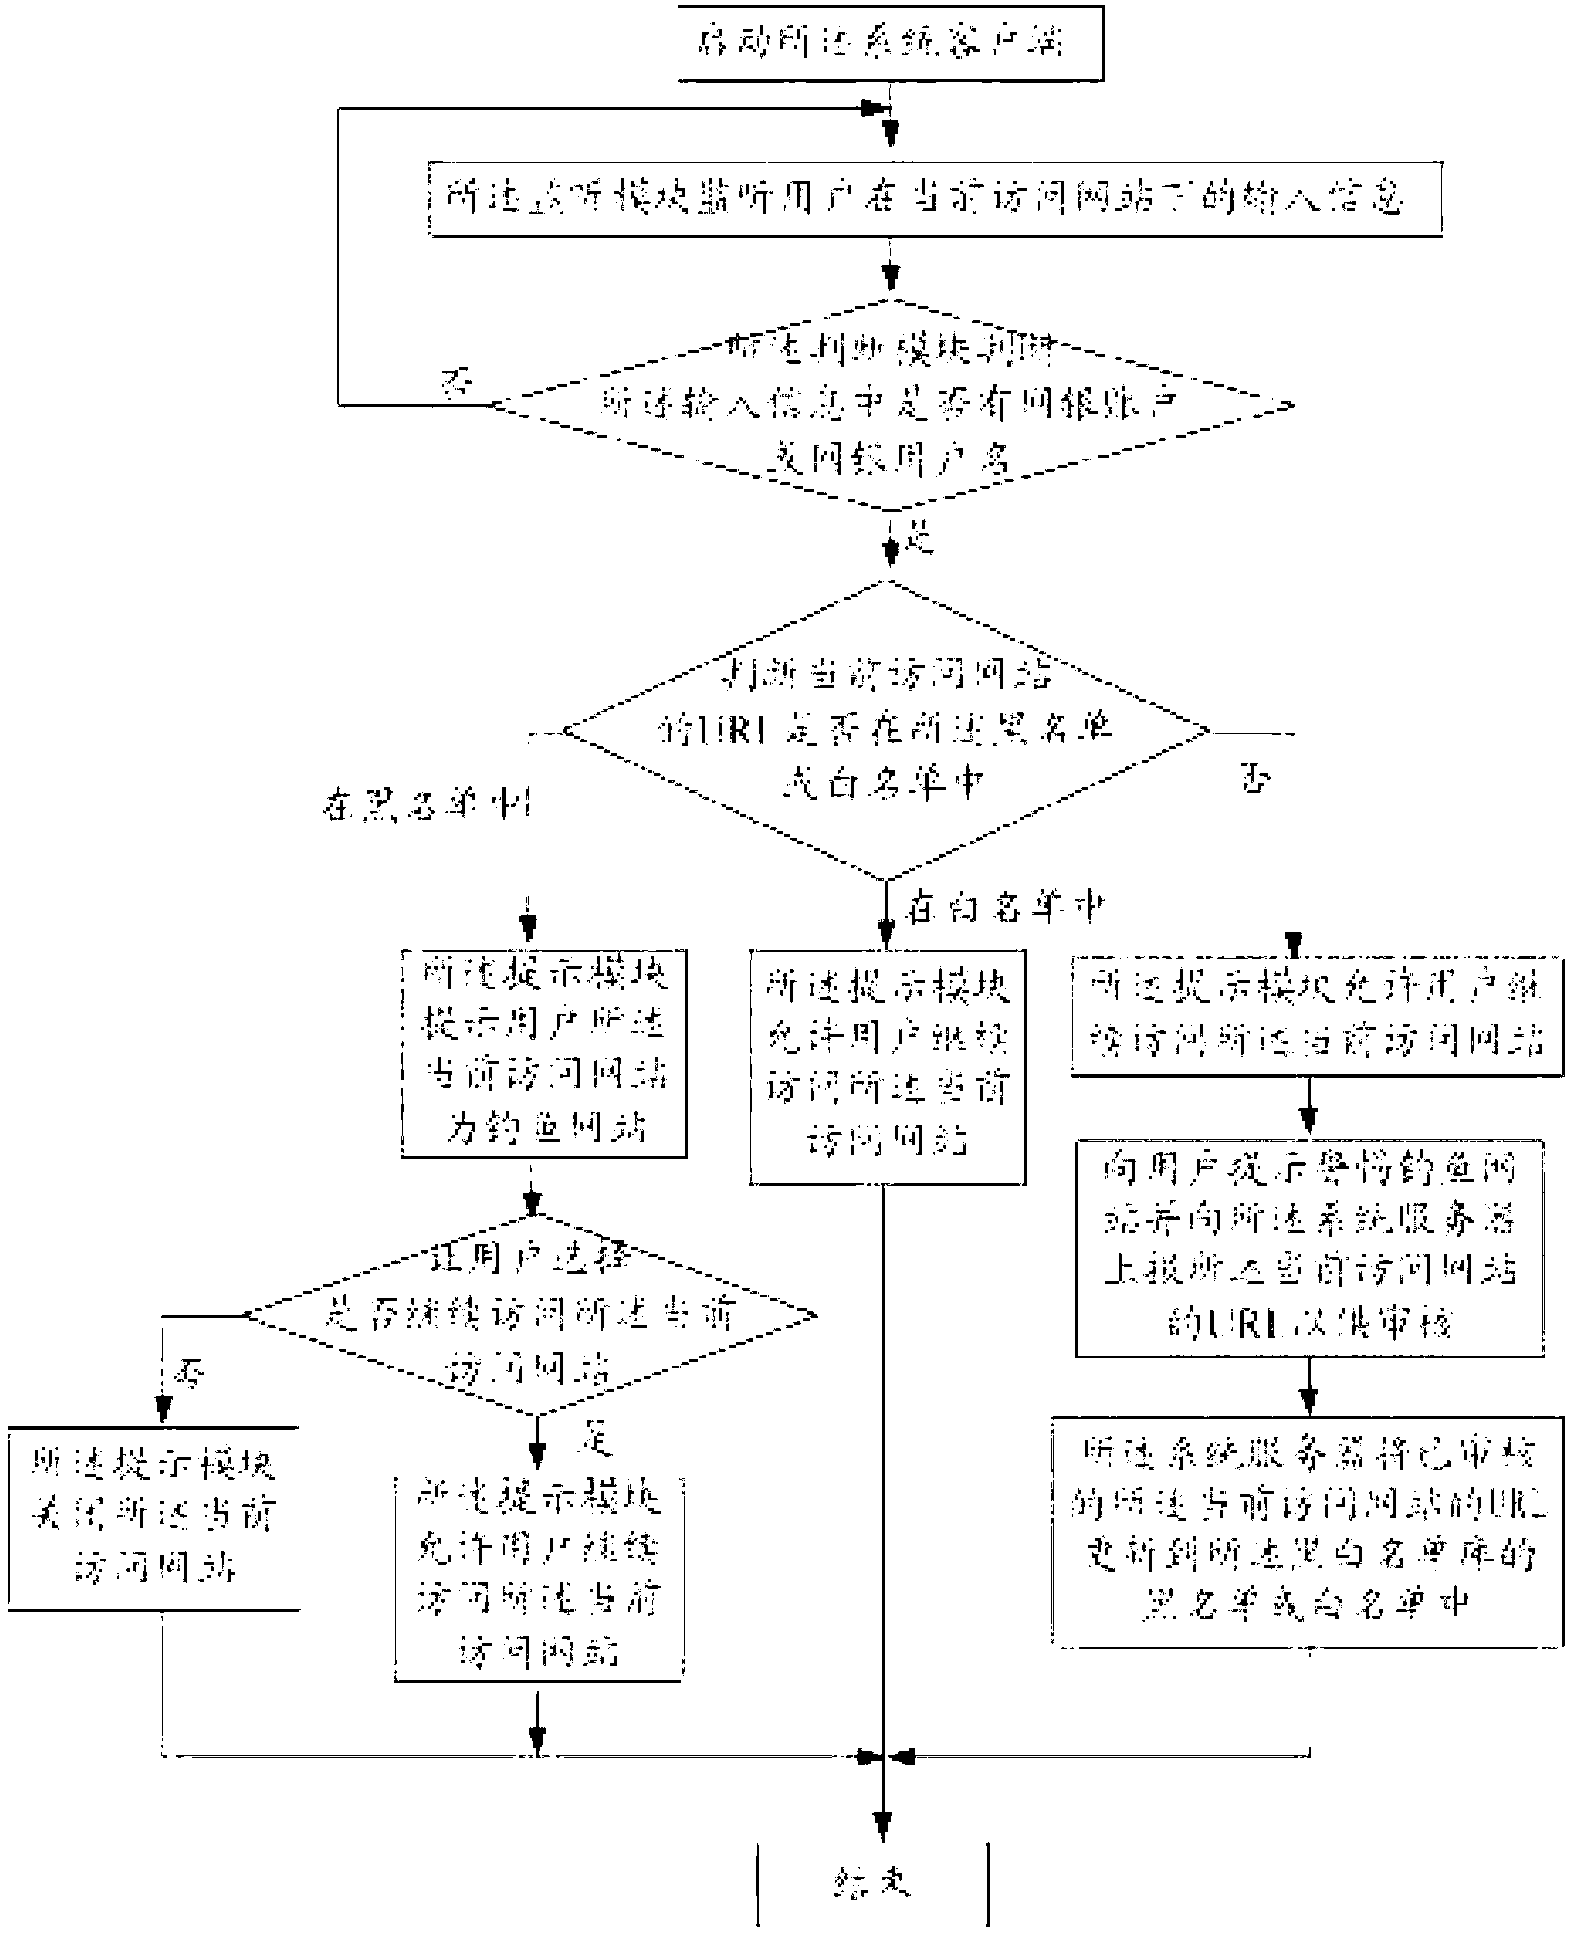 Method and system for detecting phishing website